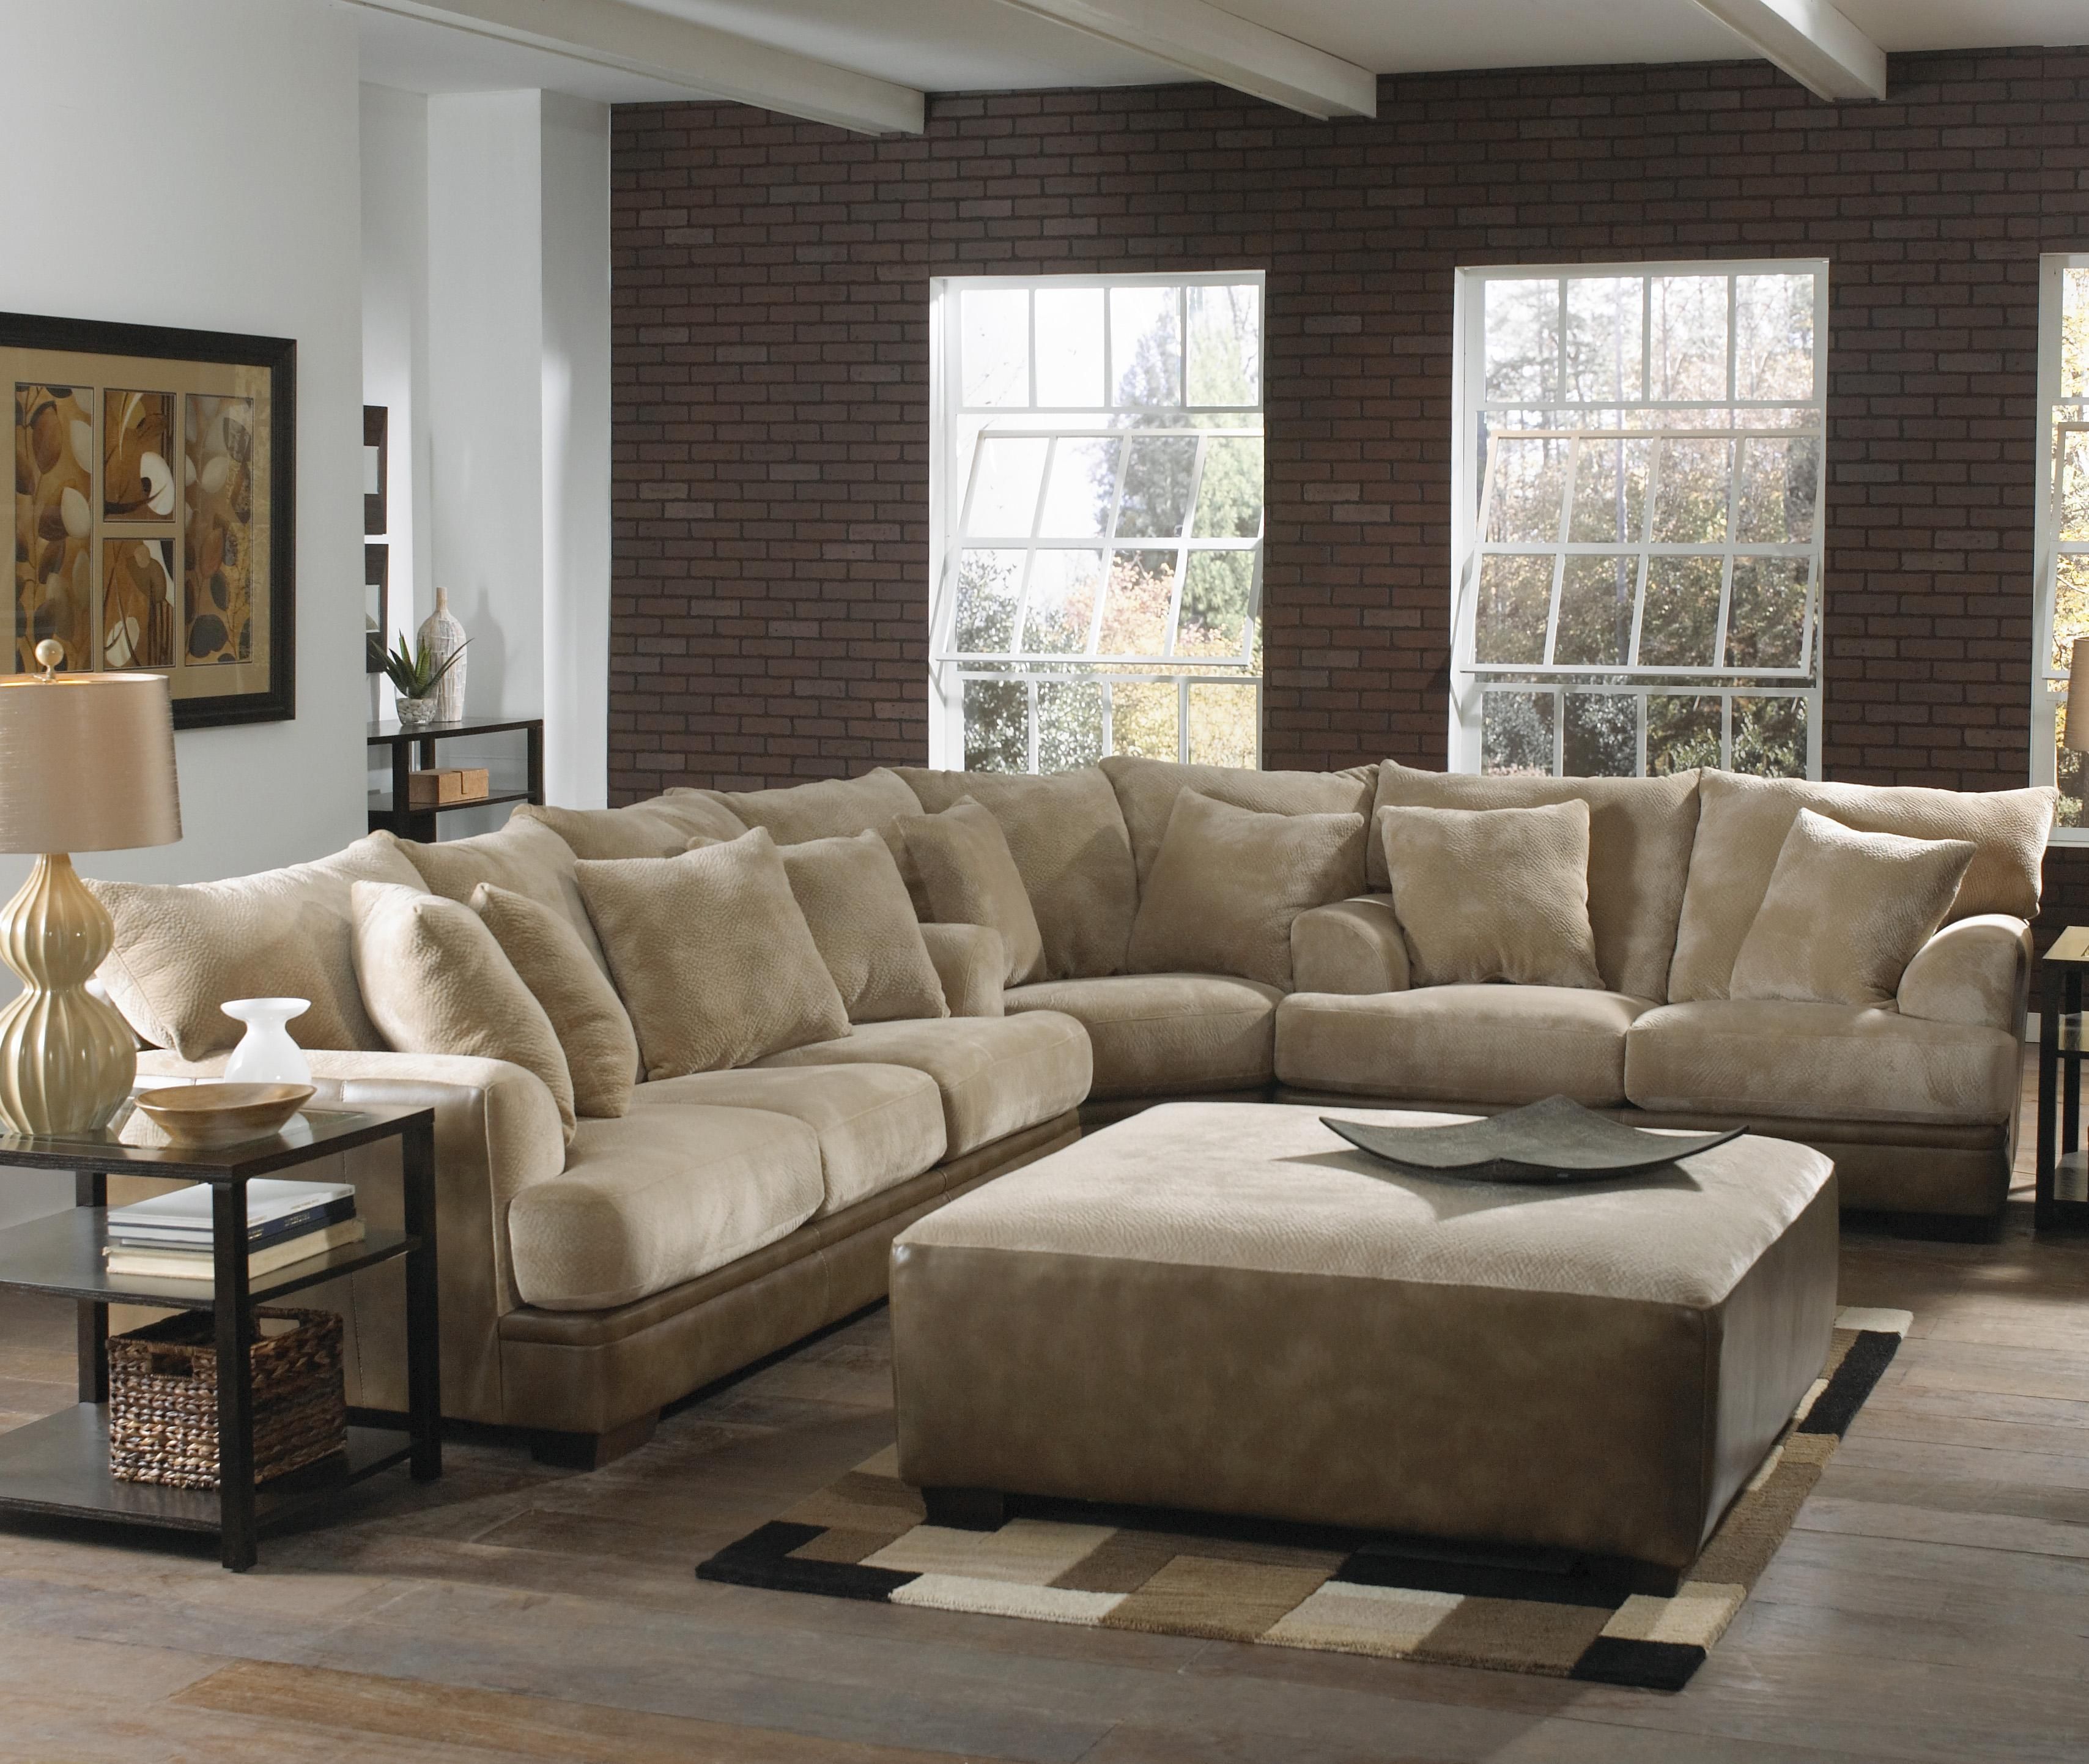 12 Photos Extra Large Sectional Sofas